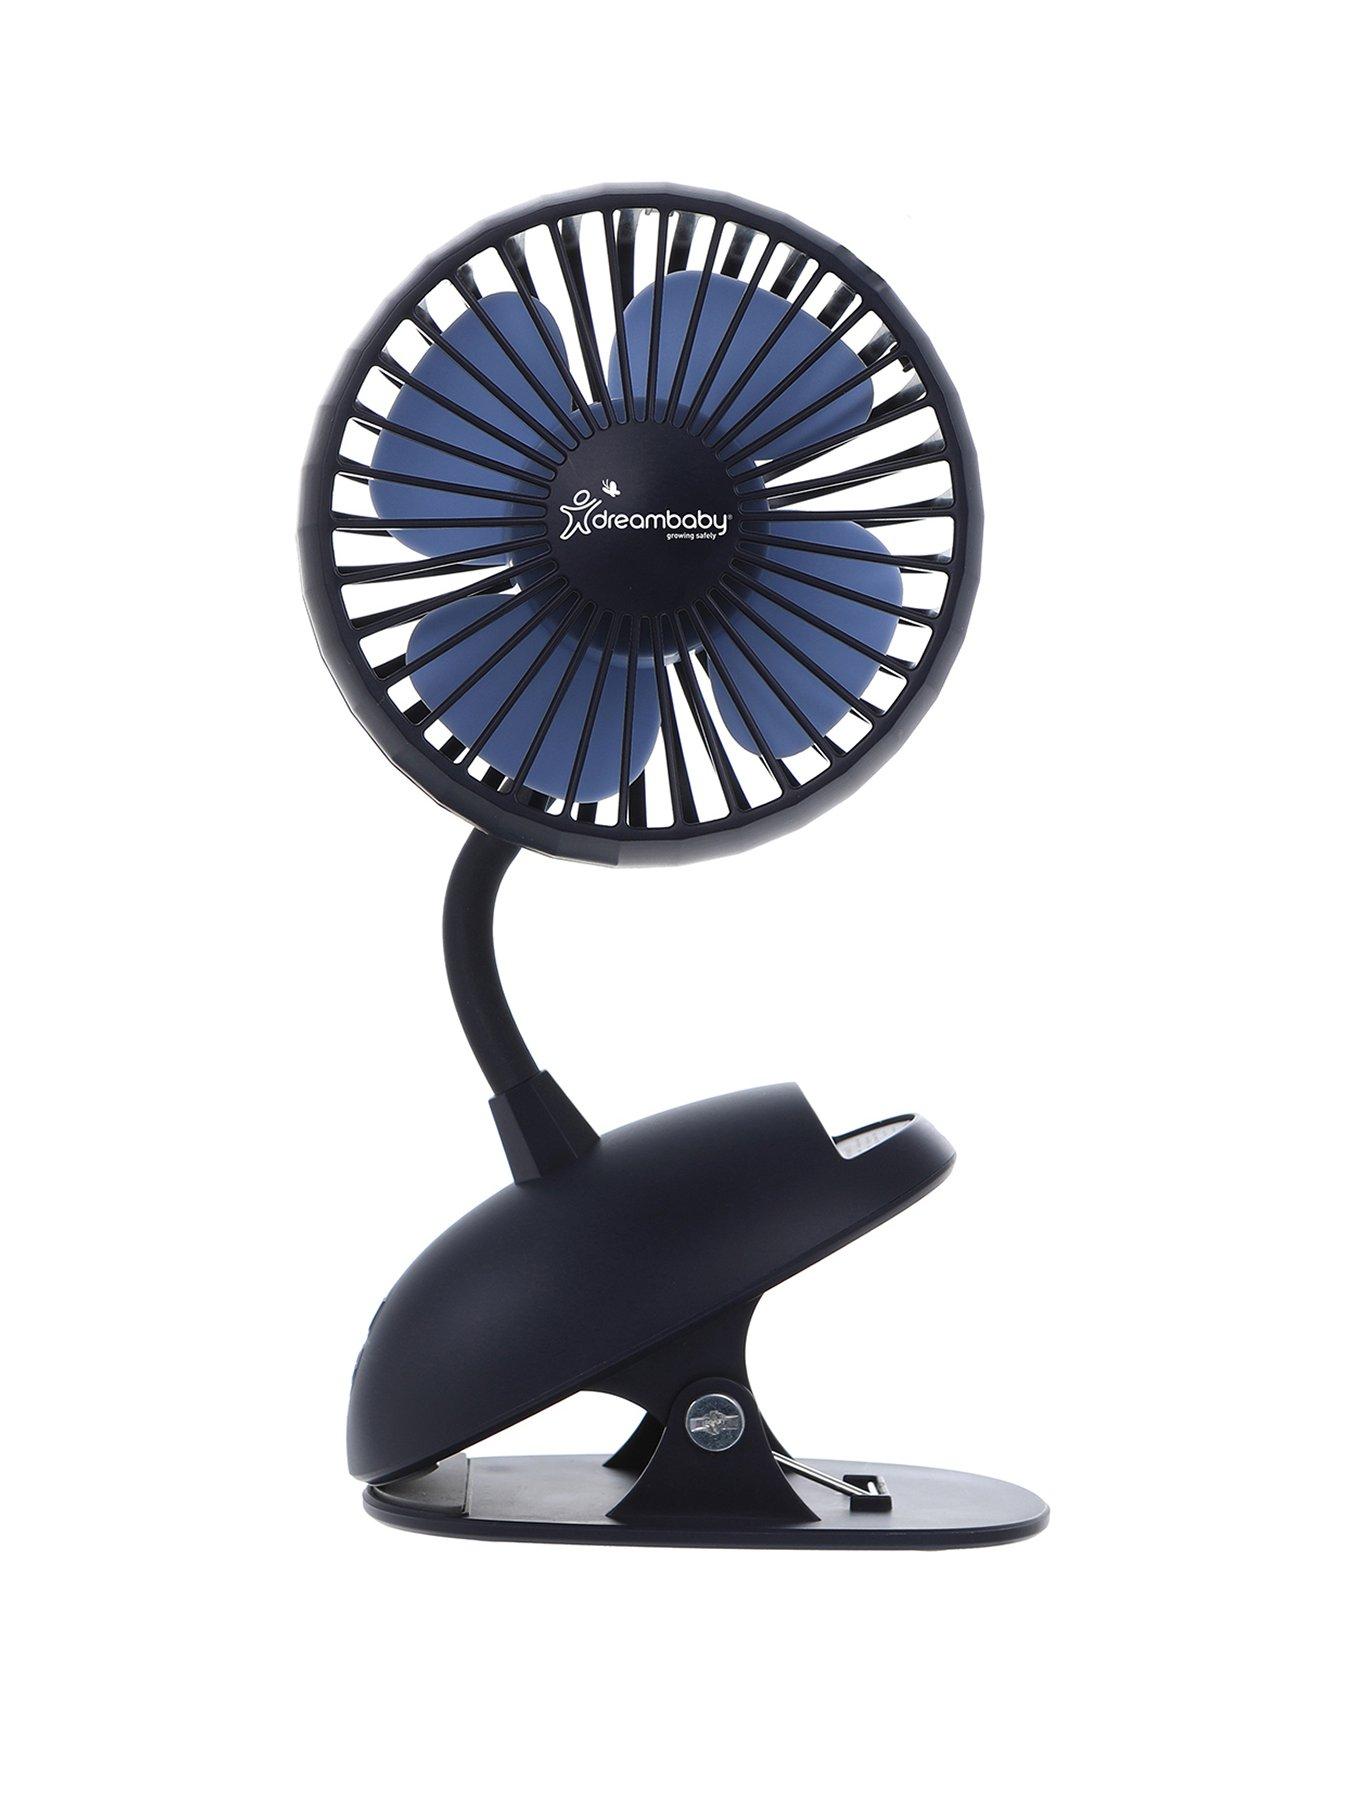 Dreambaby EZY-Fit Clip-on Fan with Soft Fins - Perfect for